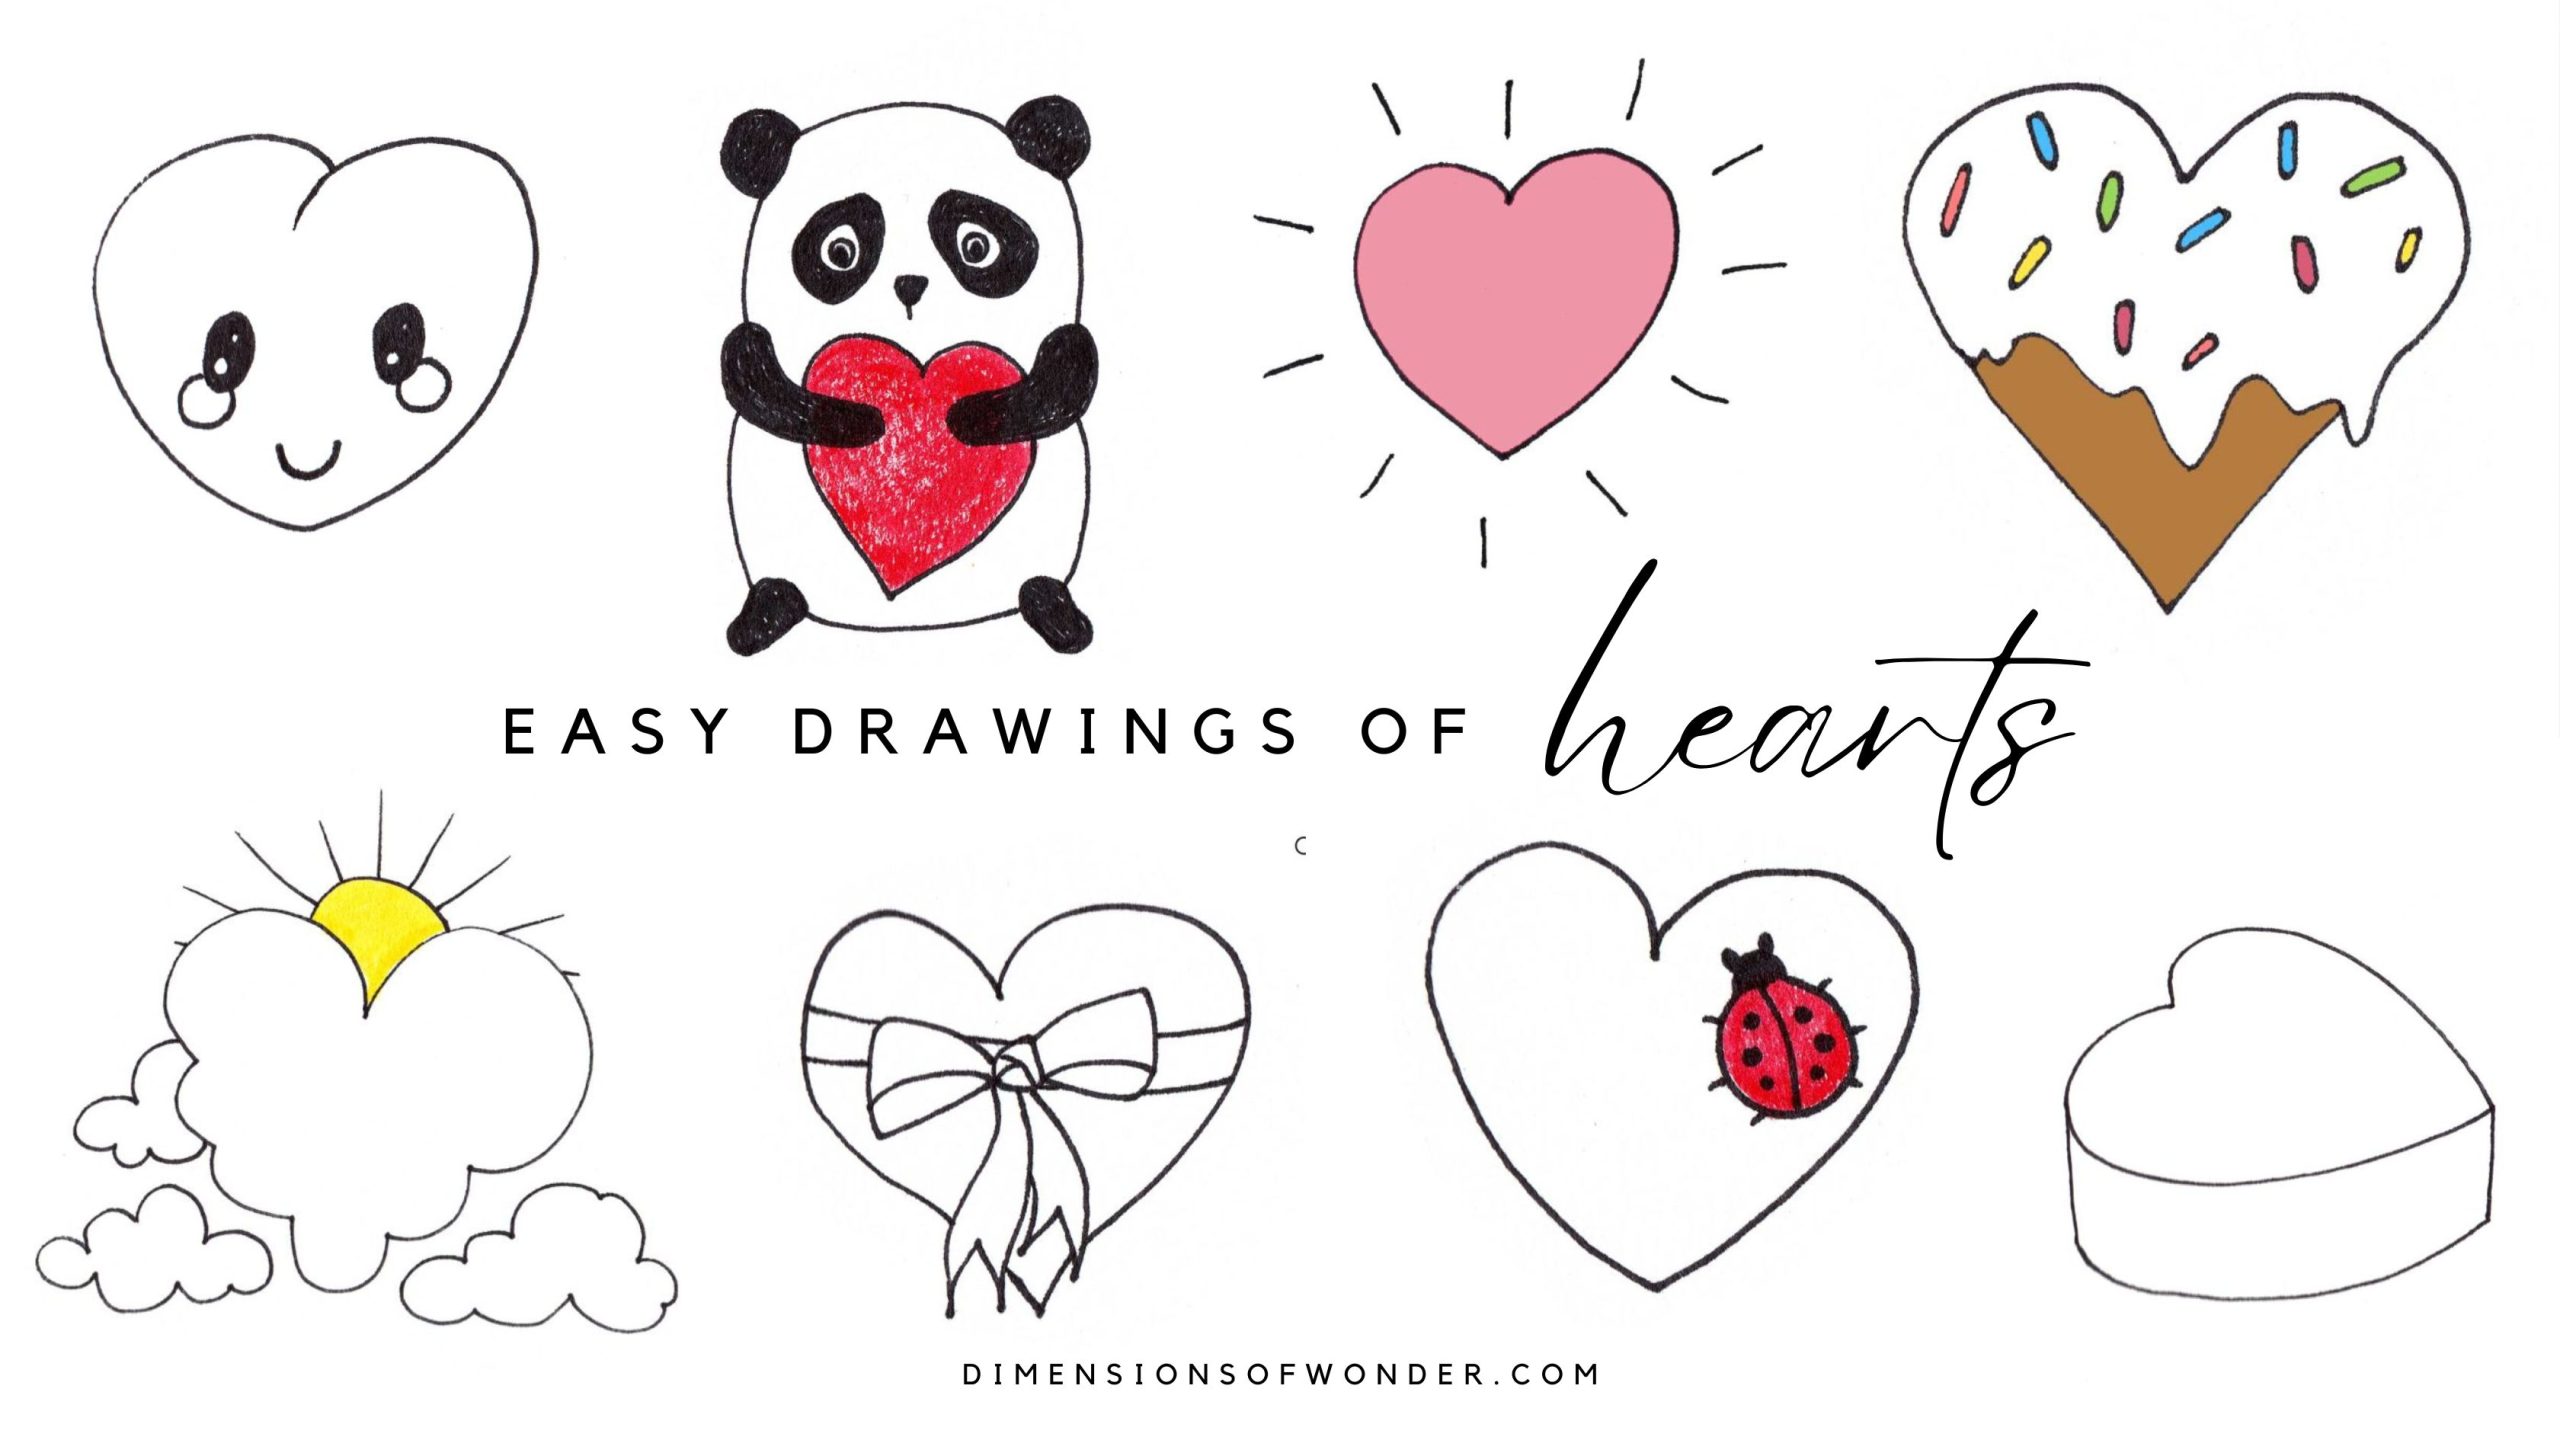 How to Draw a Cute Heart - Really Easy Drawing Tutorial